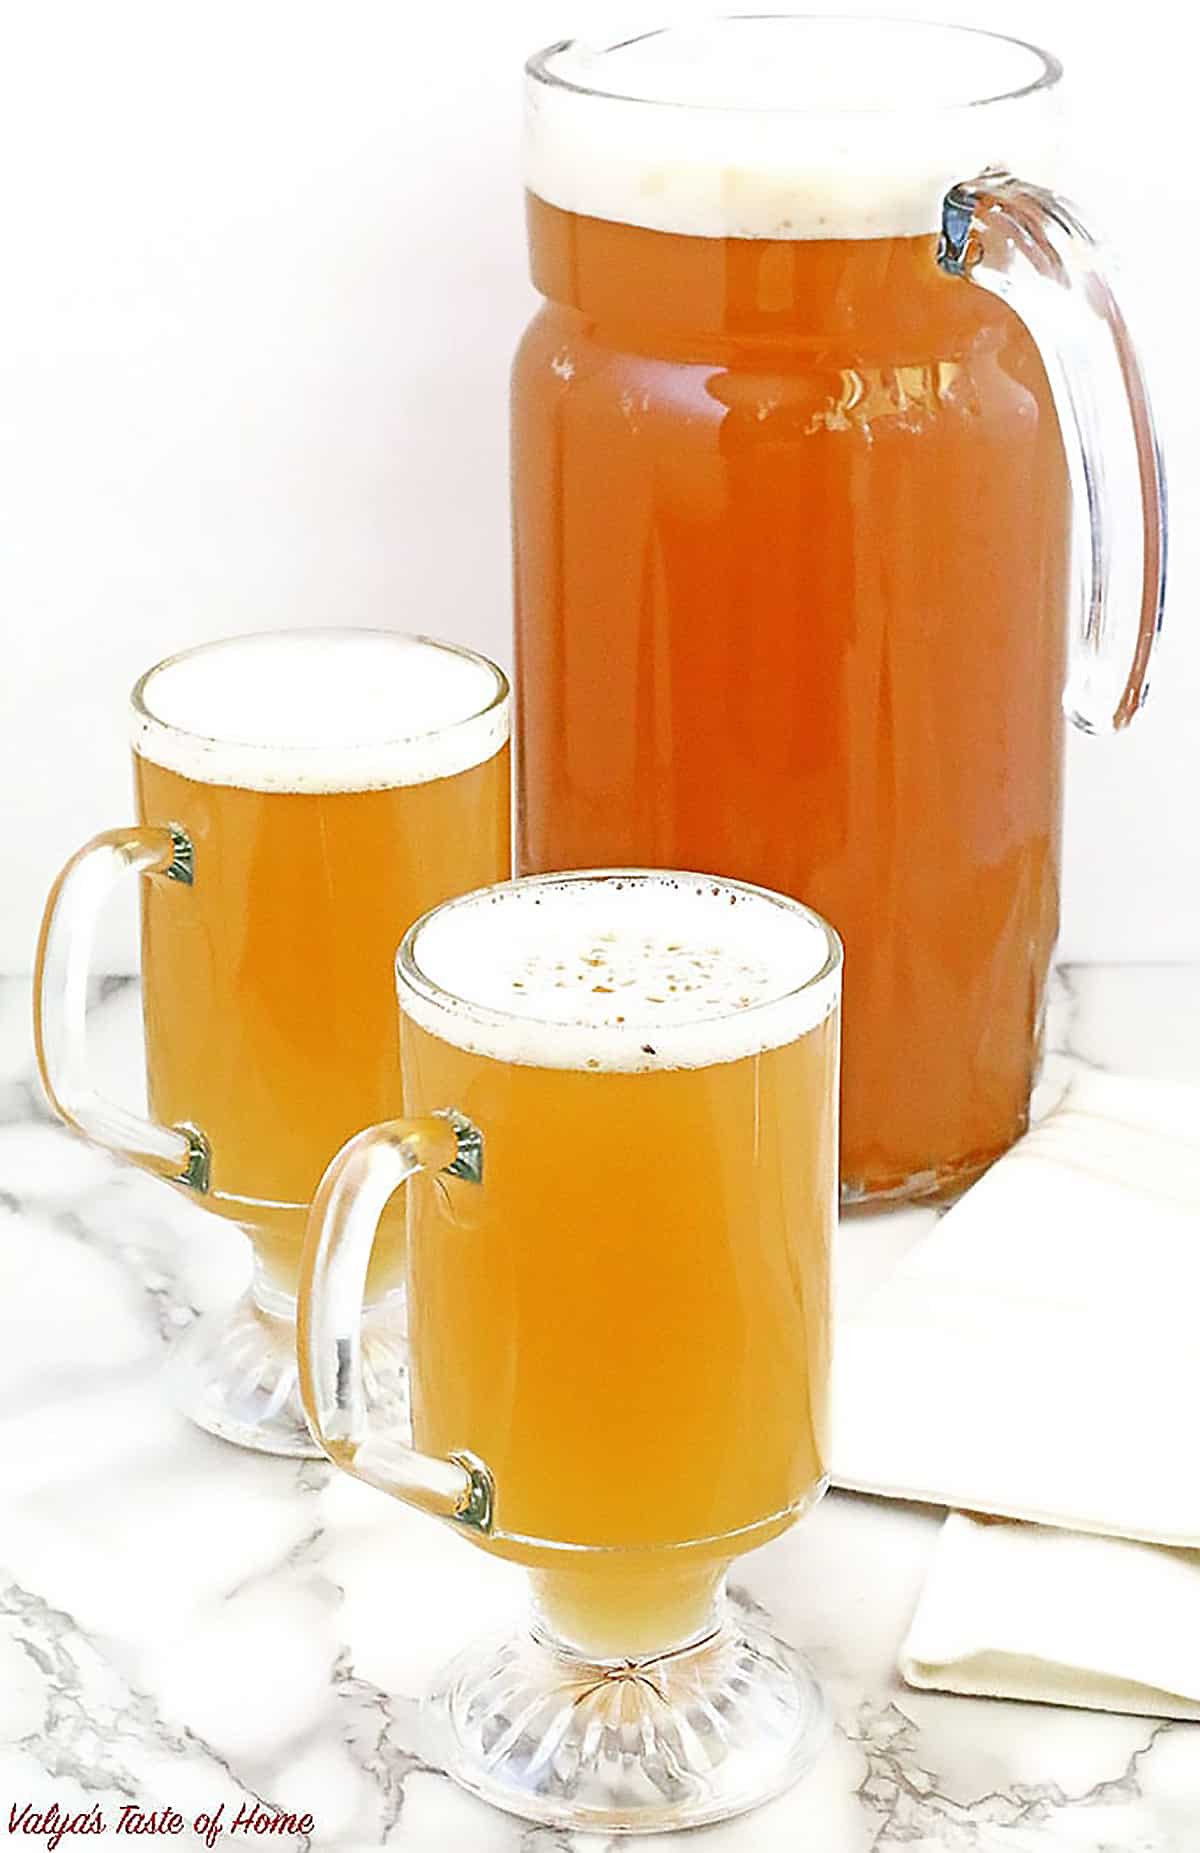 Kvass is a fermented non-alcoholic beverage sometimes compared to kombucha. It is usually made with dried rye bread and yeast. But my version is made of apple juice. It is super tasty and refreshing especially over ice on a hot summer day.